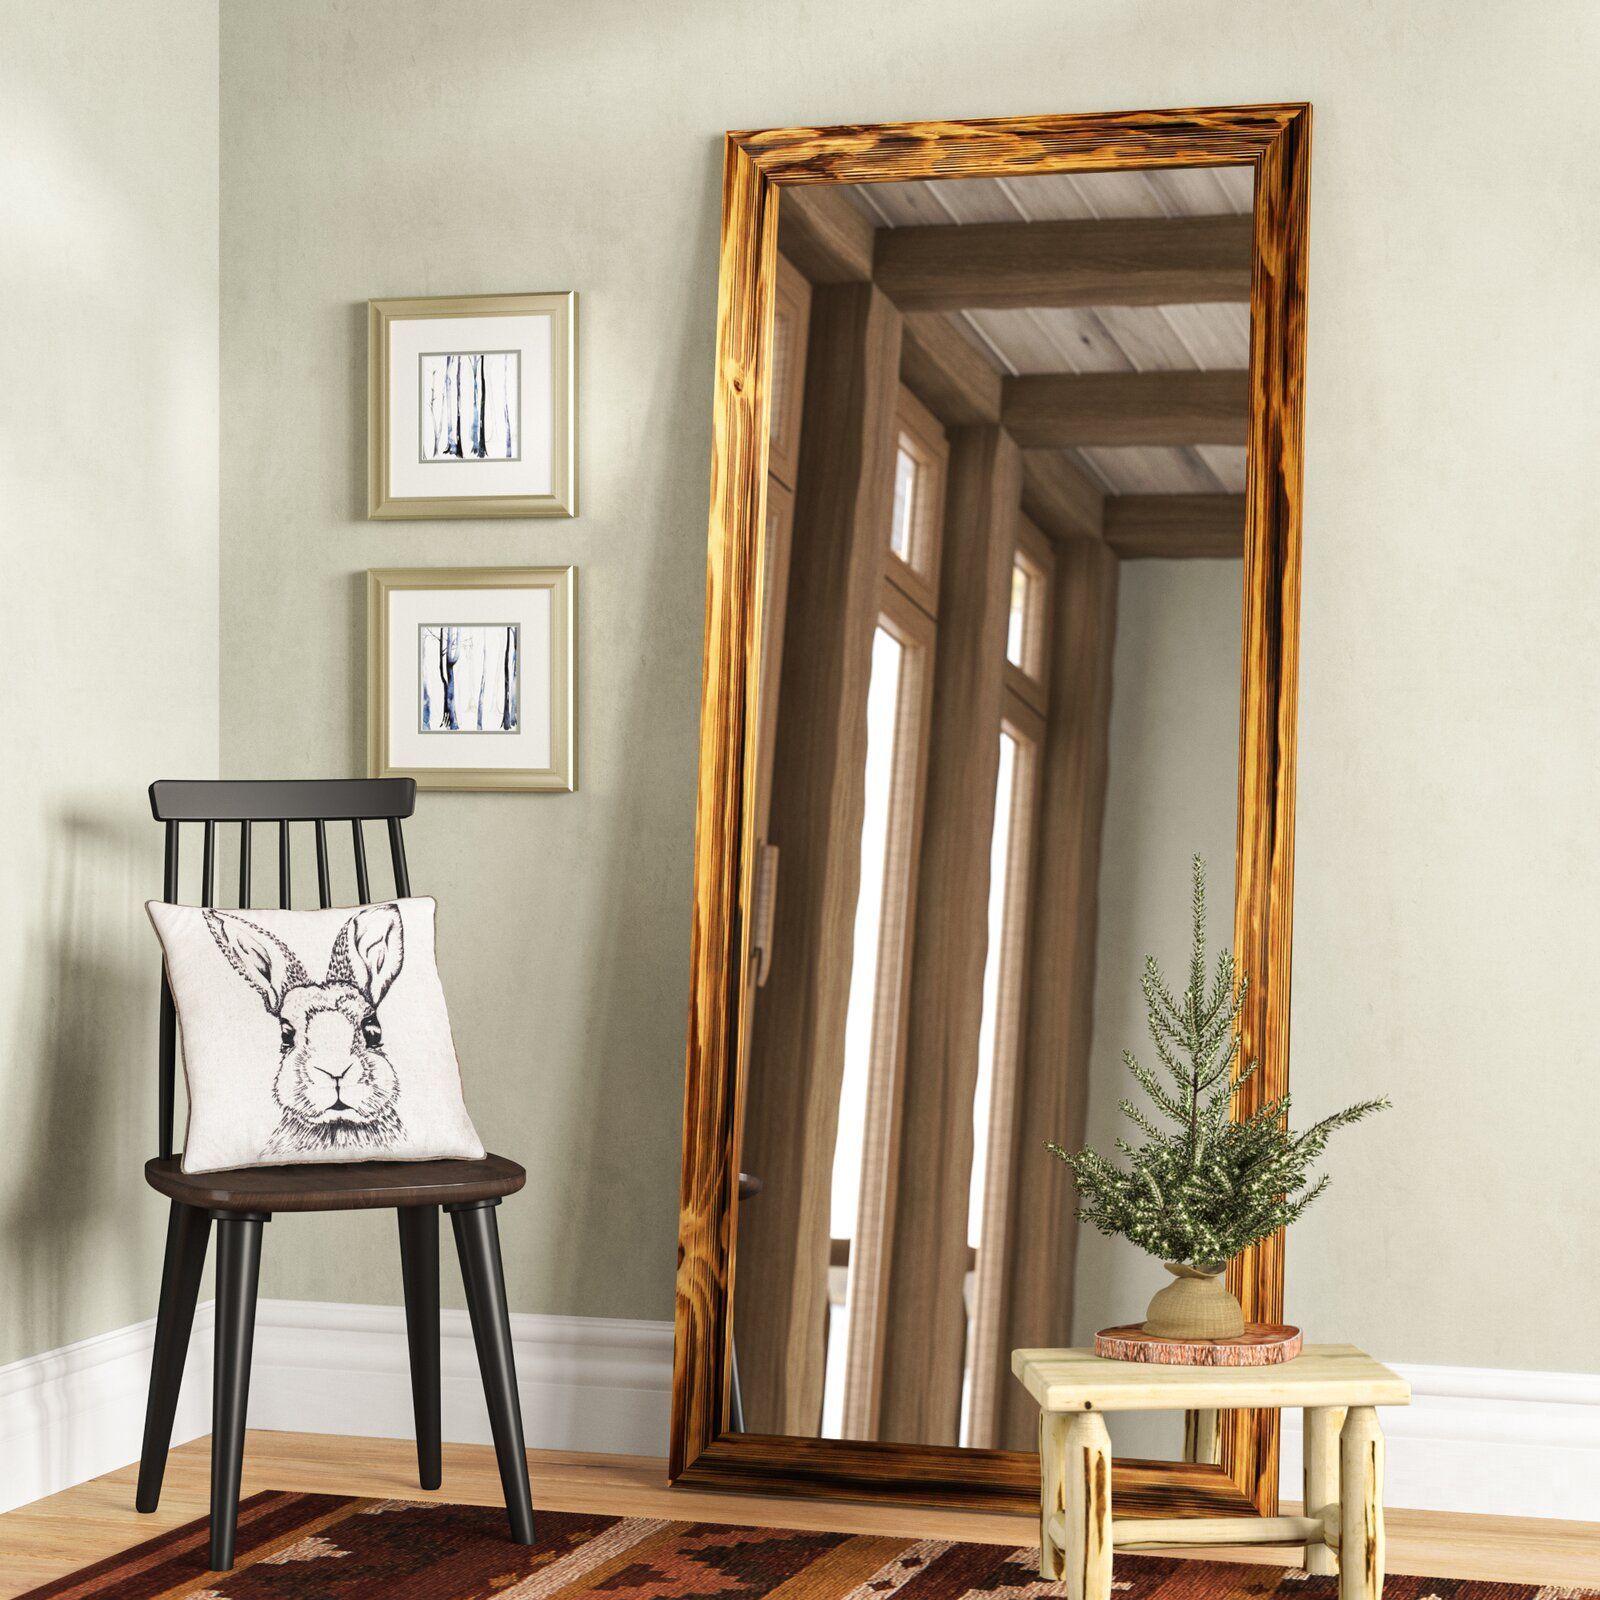 Cairo Platinum Gold Decorative Wall Mirror | Rustic Full Length Mirror For Mahogany Full Length Mirrors (View 9 of 15)